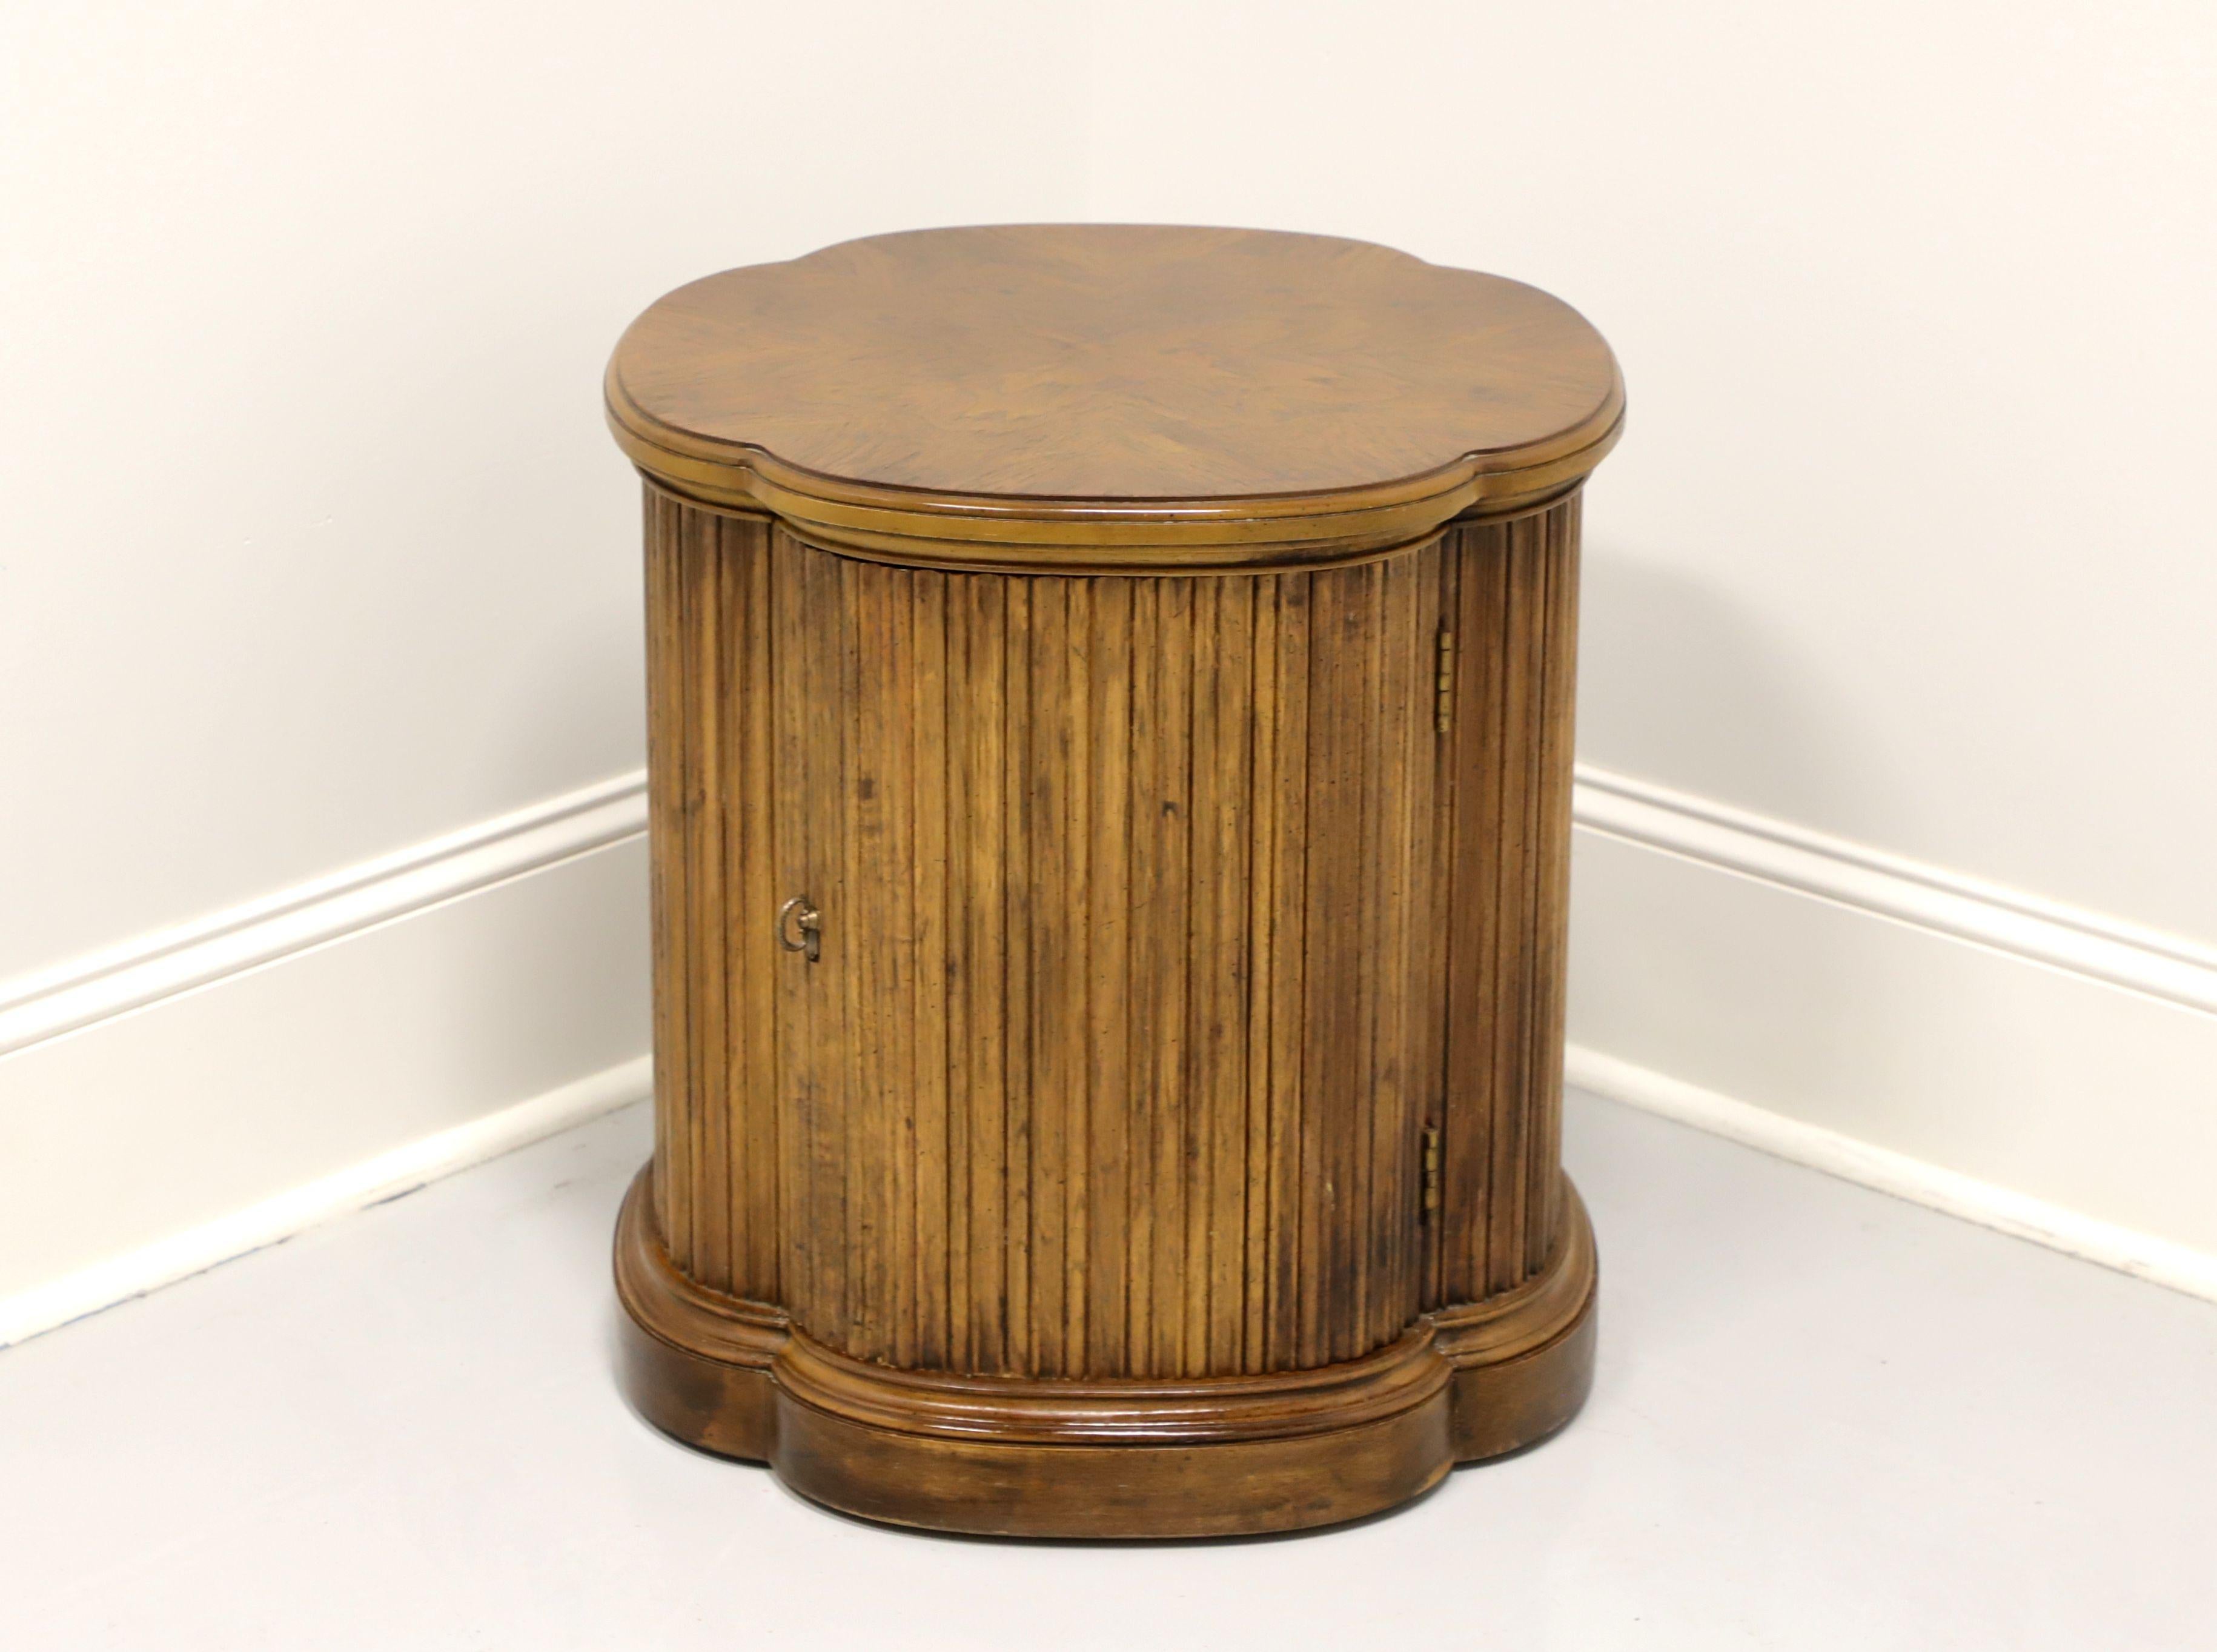 A Transitional style clover shaped cabinet accent table by Henredon. Burl walnut with brass pull. Features unique four leaf clover shape and ample storage within cabinet. Made in North Carolina, USA, in the mid 20th Century. 

Measures: 20.25W